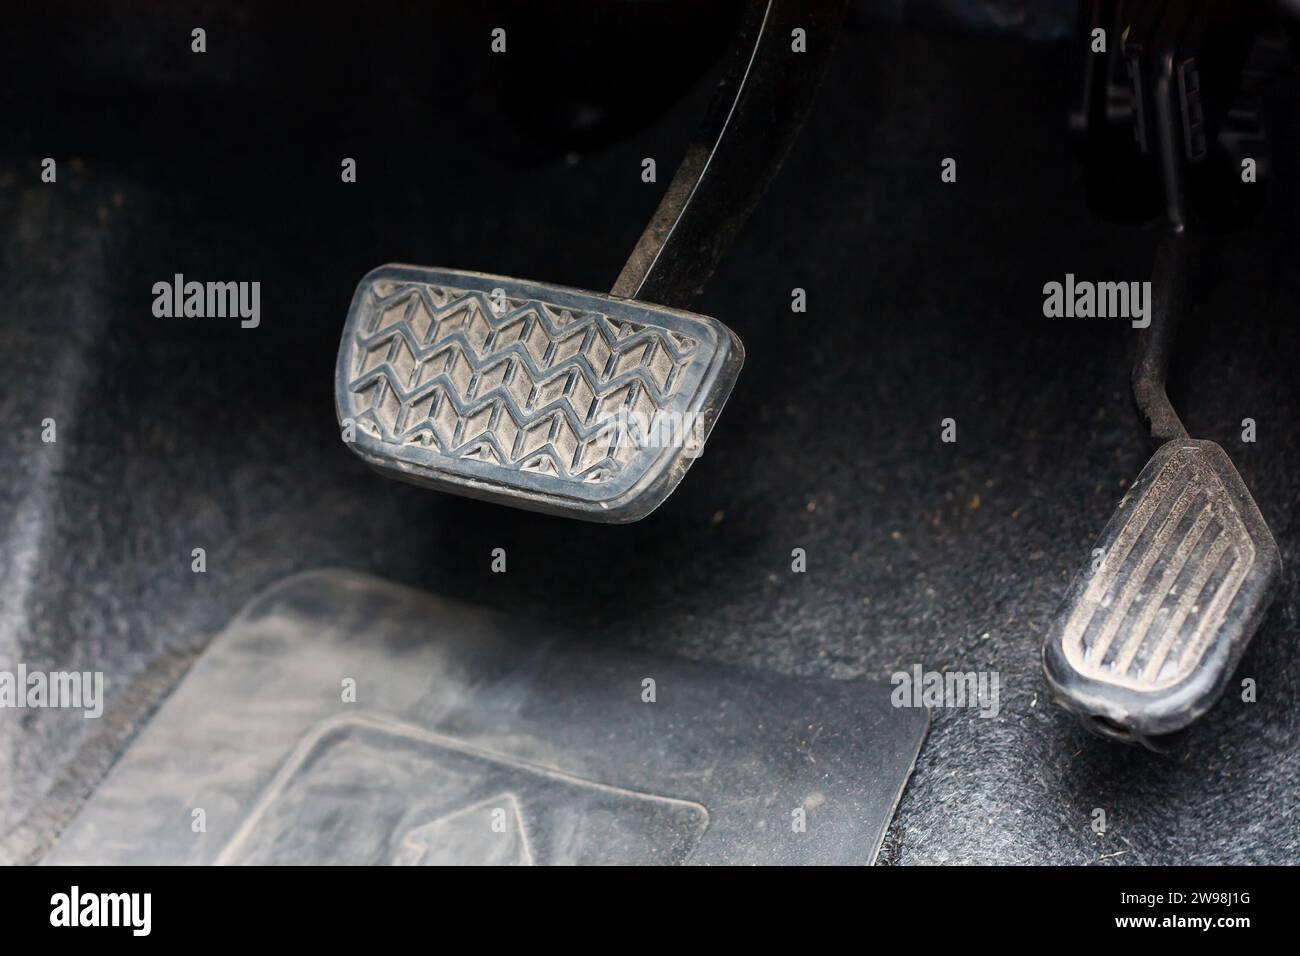 Brake and accelerator pedal, brake pedal and the accelerator pedal in a car  with automatic transmission Stock Photo - Alamy